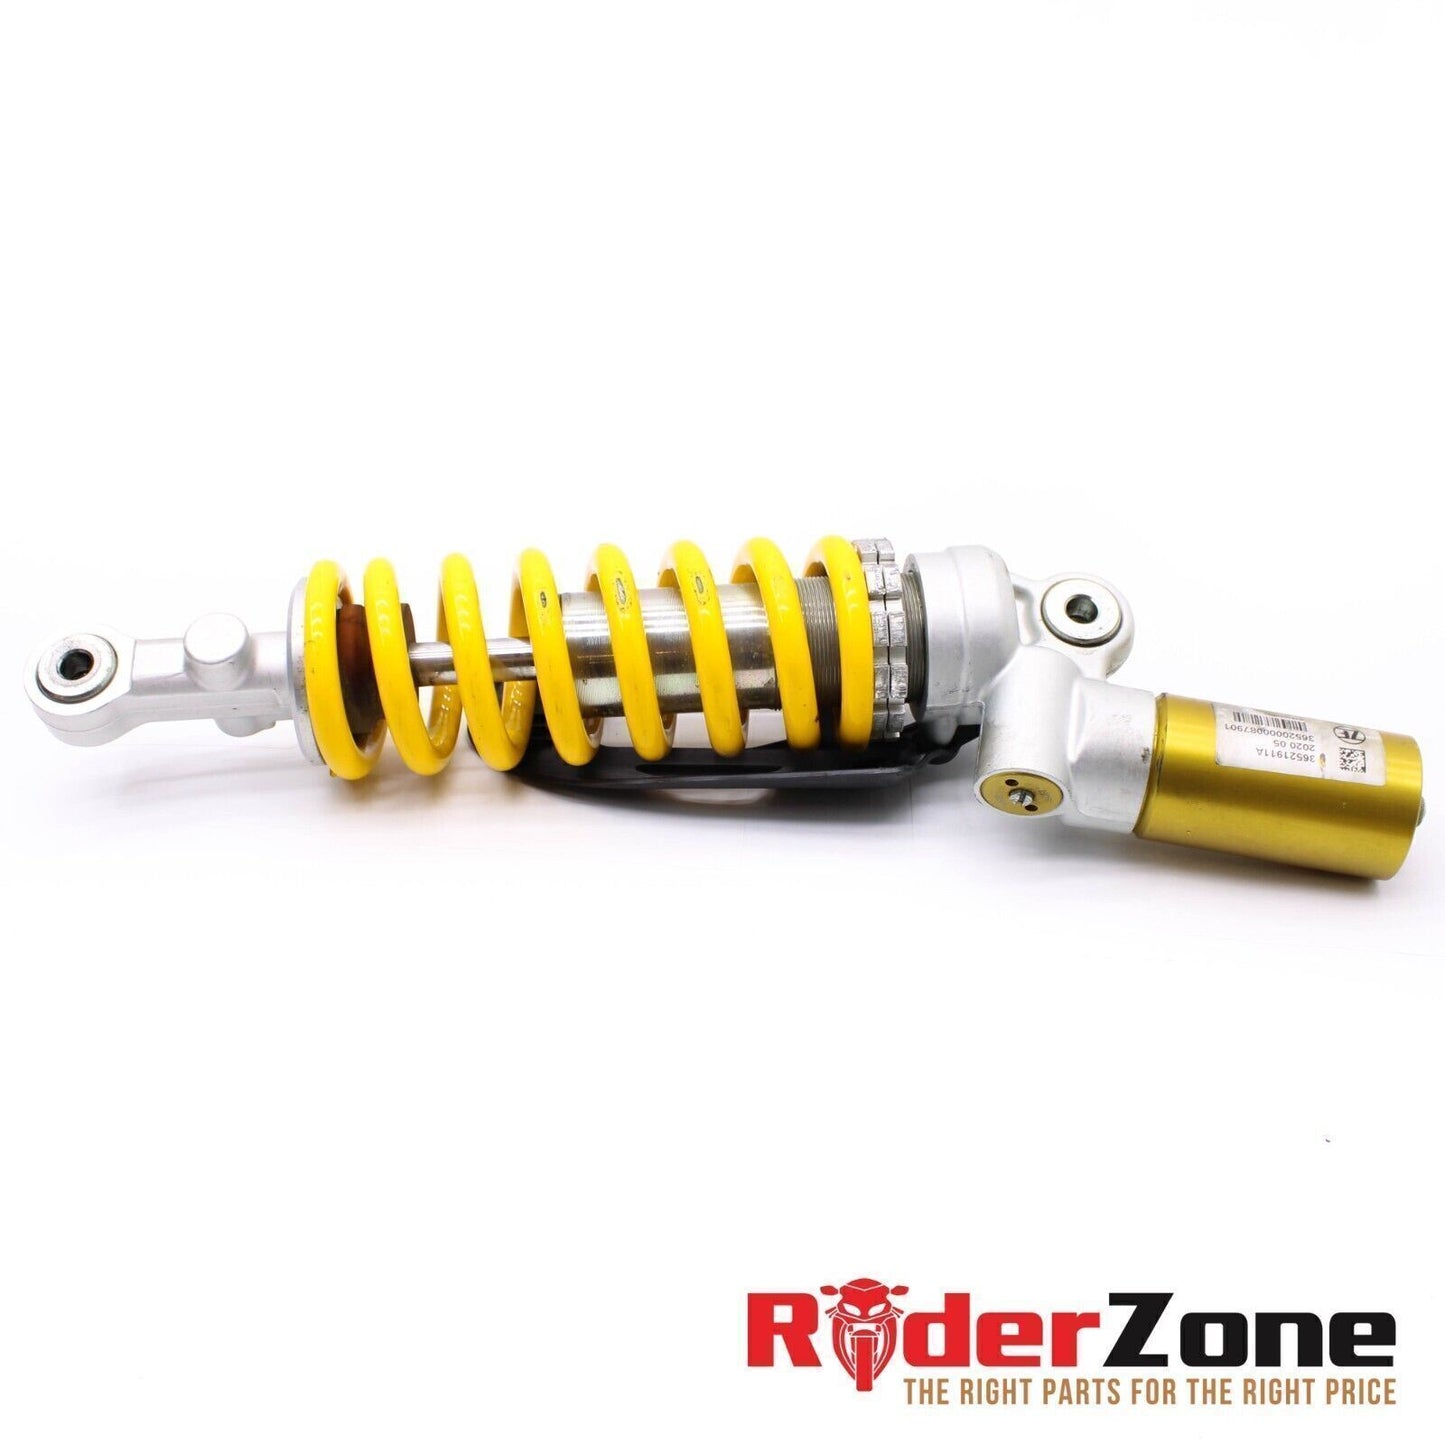 2020 - 2022 DUCATI PANIGALE V2 SHOCK BACK SUSPENSION YELLOW REAR SPRING STOCK